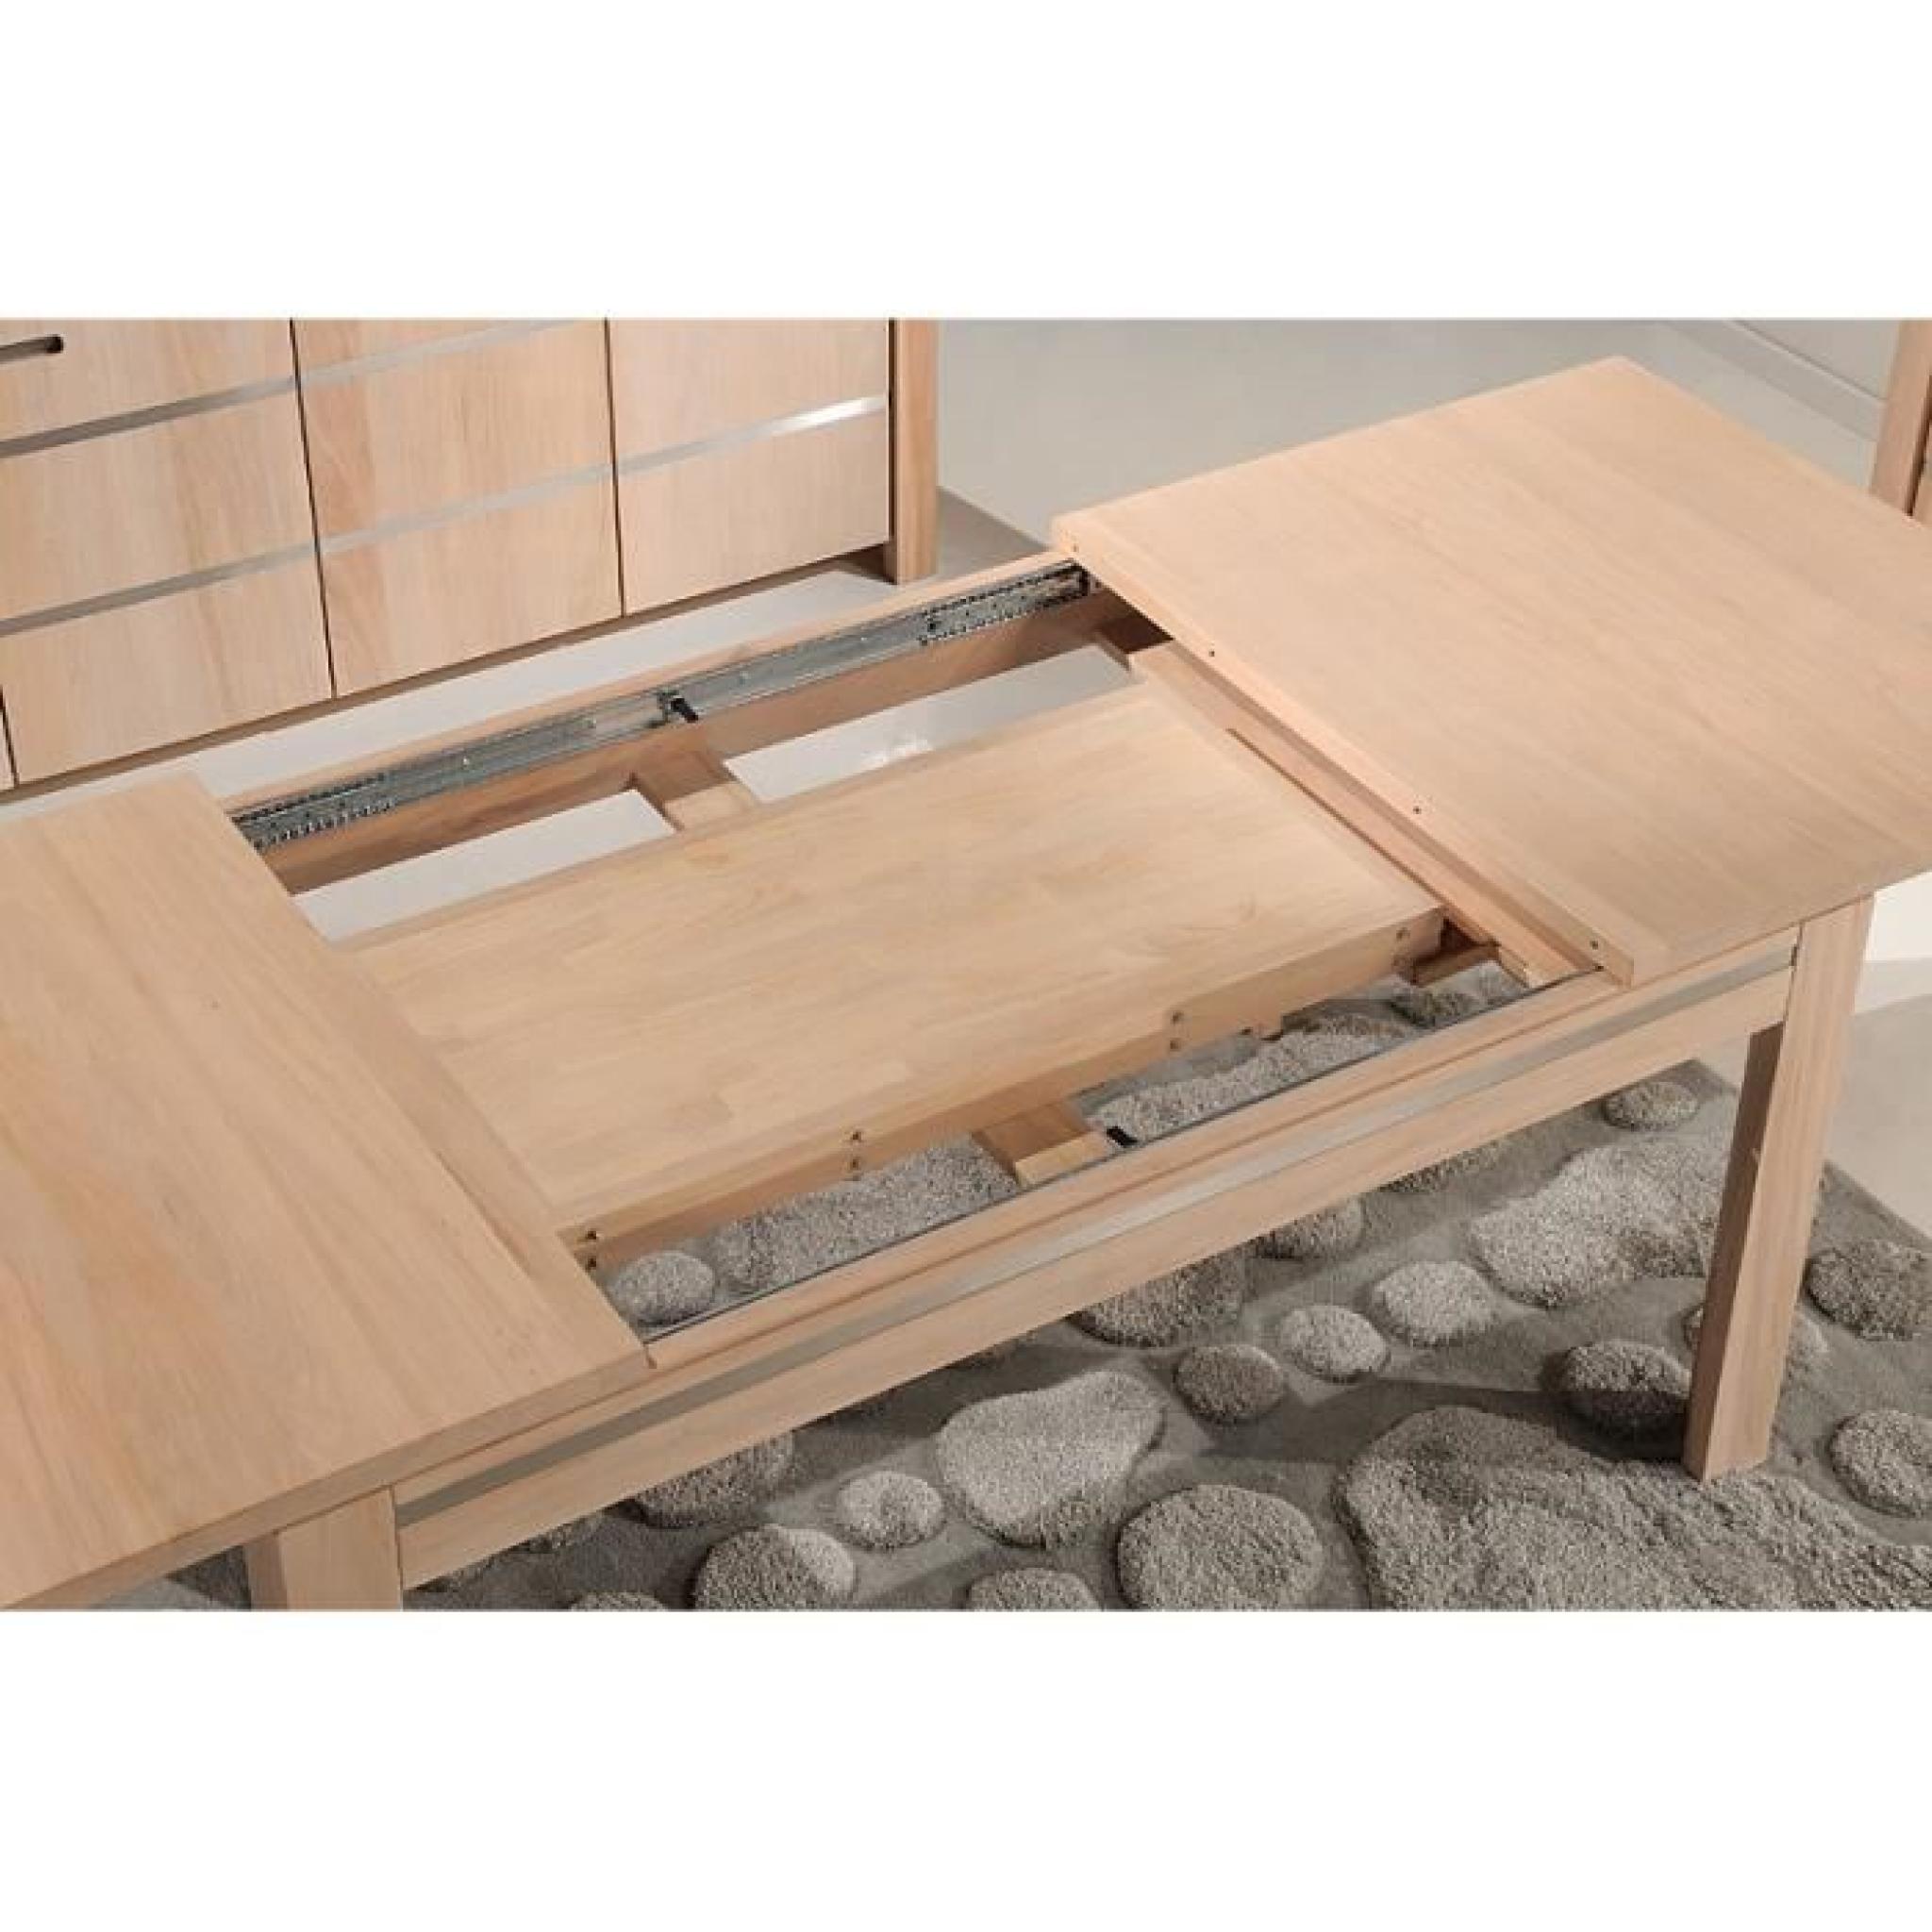 Table OPALE 160/95 ORME MASSIF-INOX (Orme - Wengé) pas cher